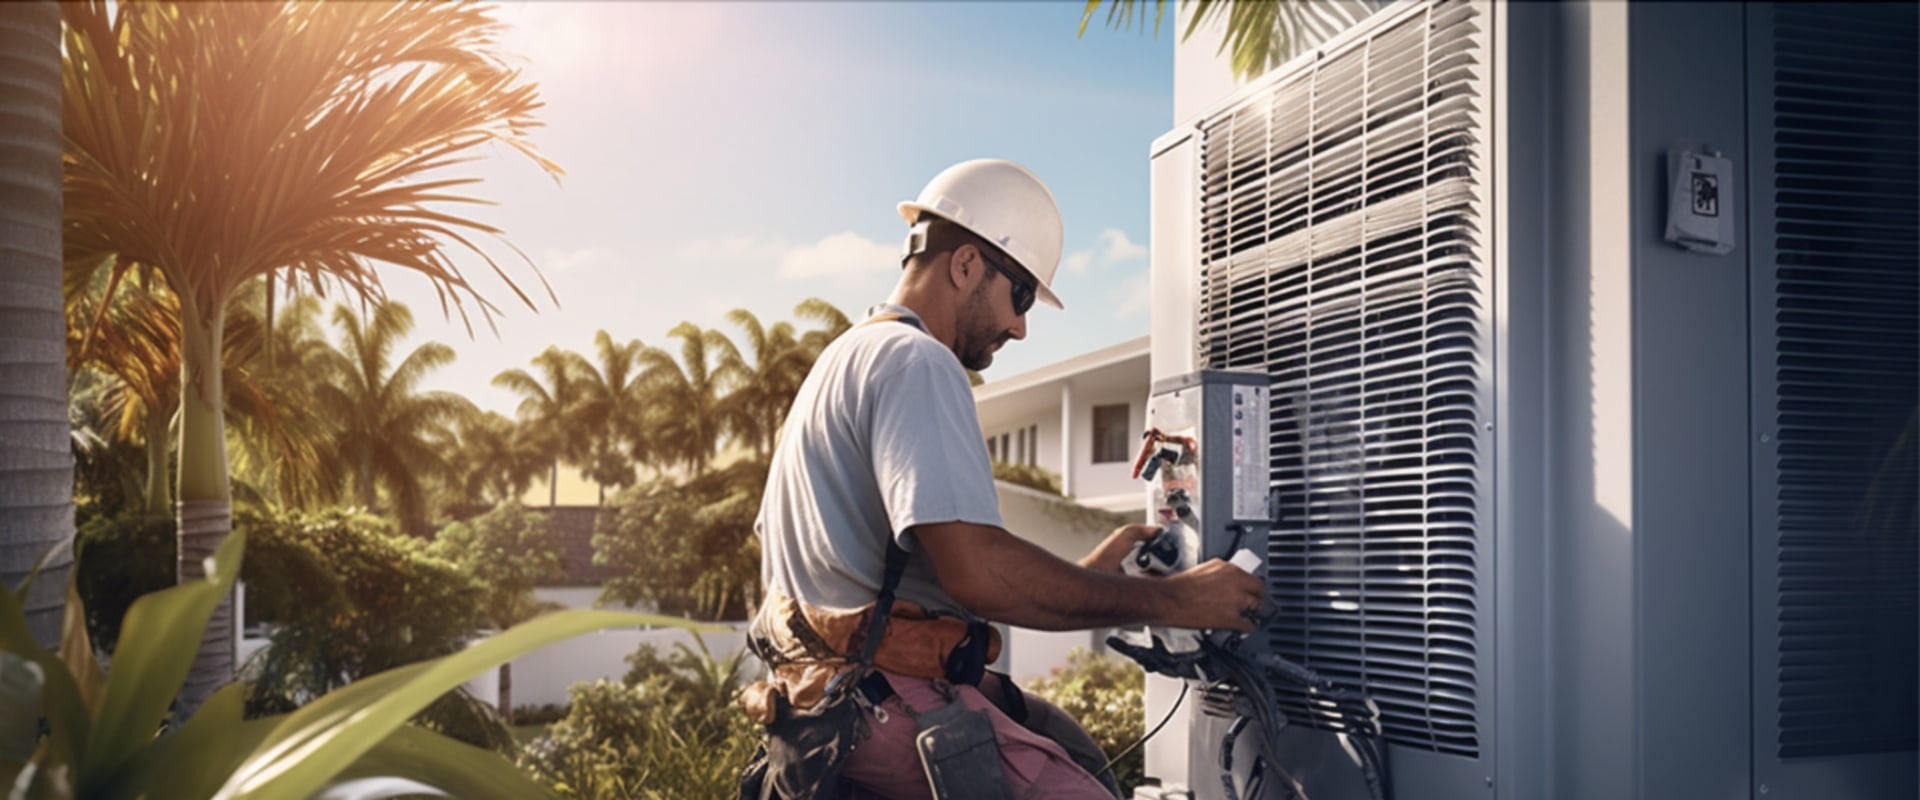 What Type of Warranty is Offered on Air Conditioning Repairs in Pembroke Pines, FL?